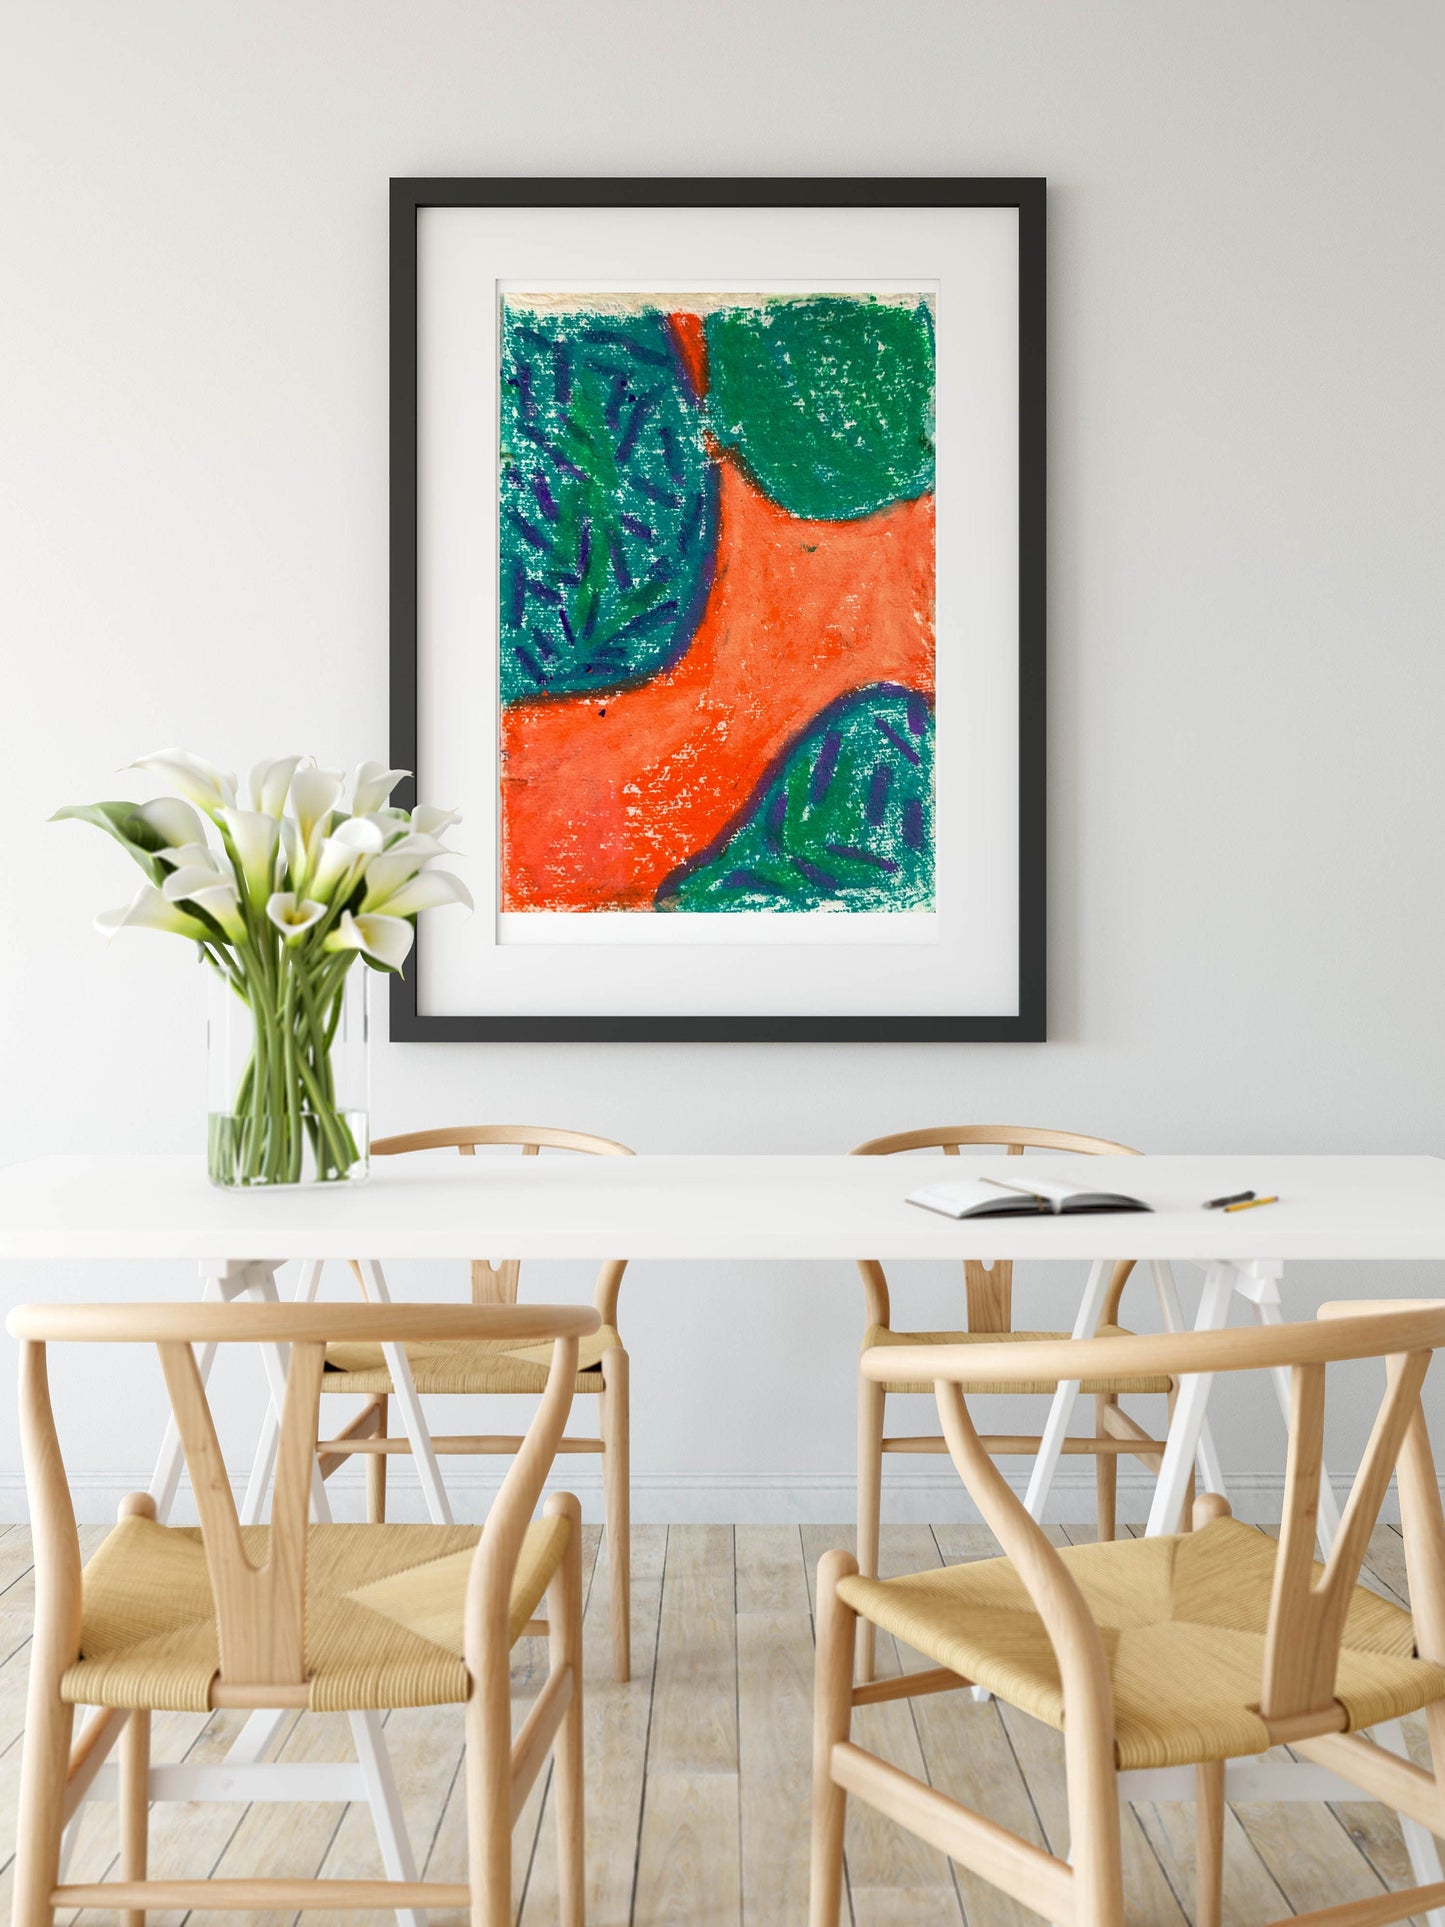 Geometric Contemporary Orange and Green Abstract Art Print